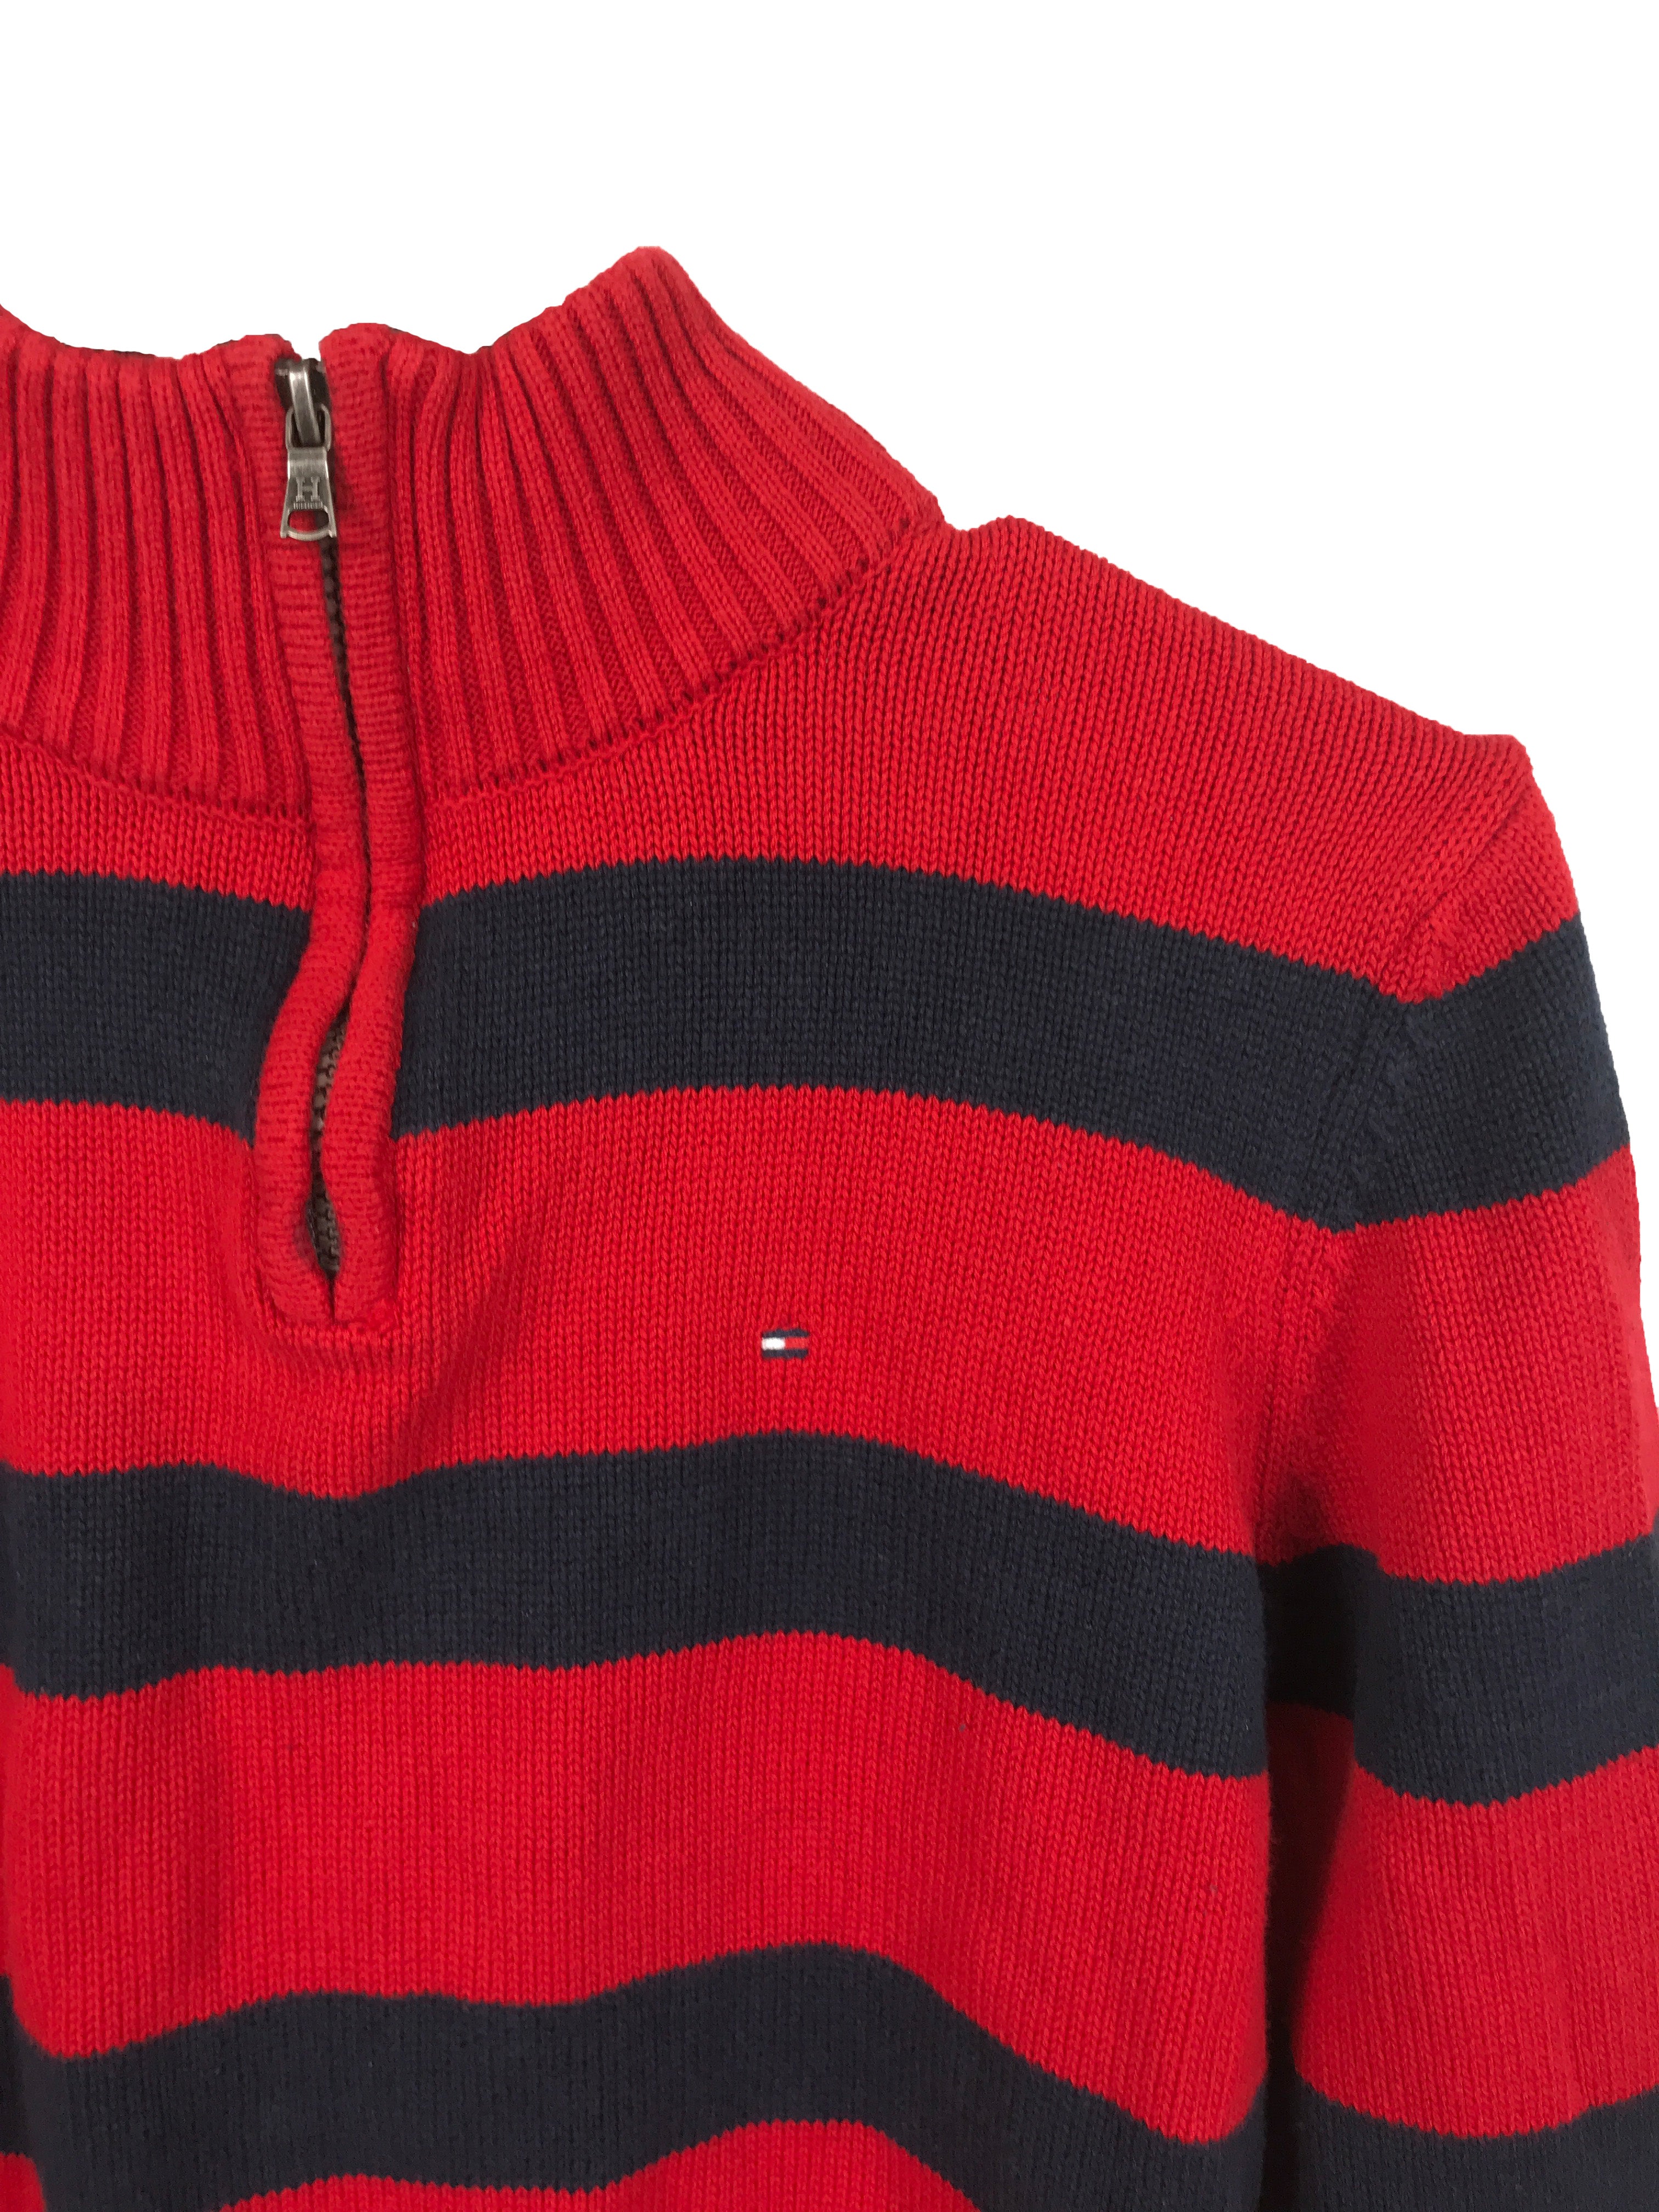 Tommy Hilfiger Red Quarter Zip Up Youth Size L